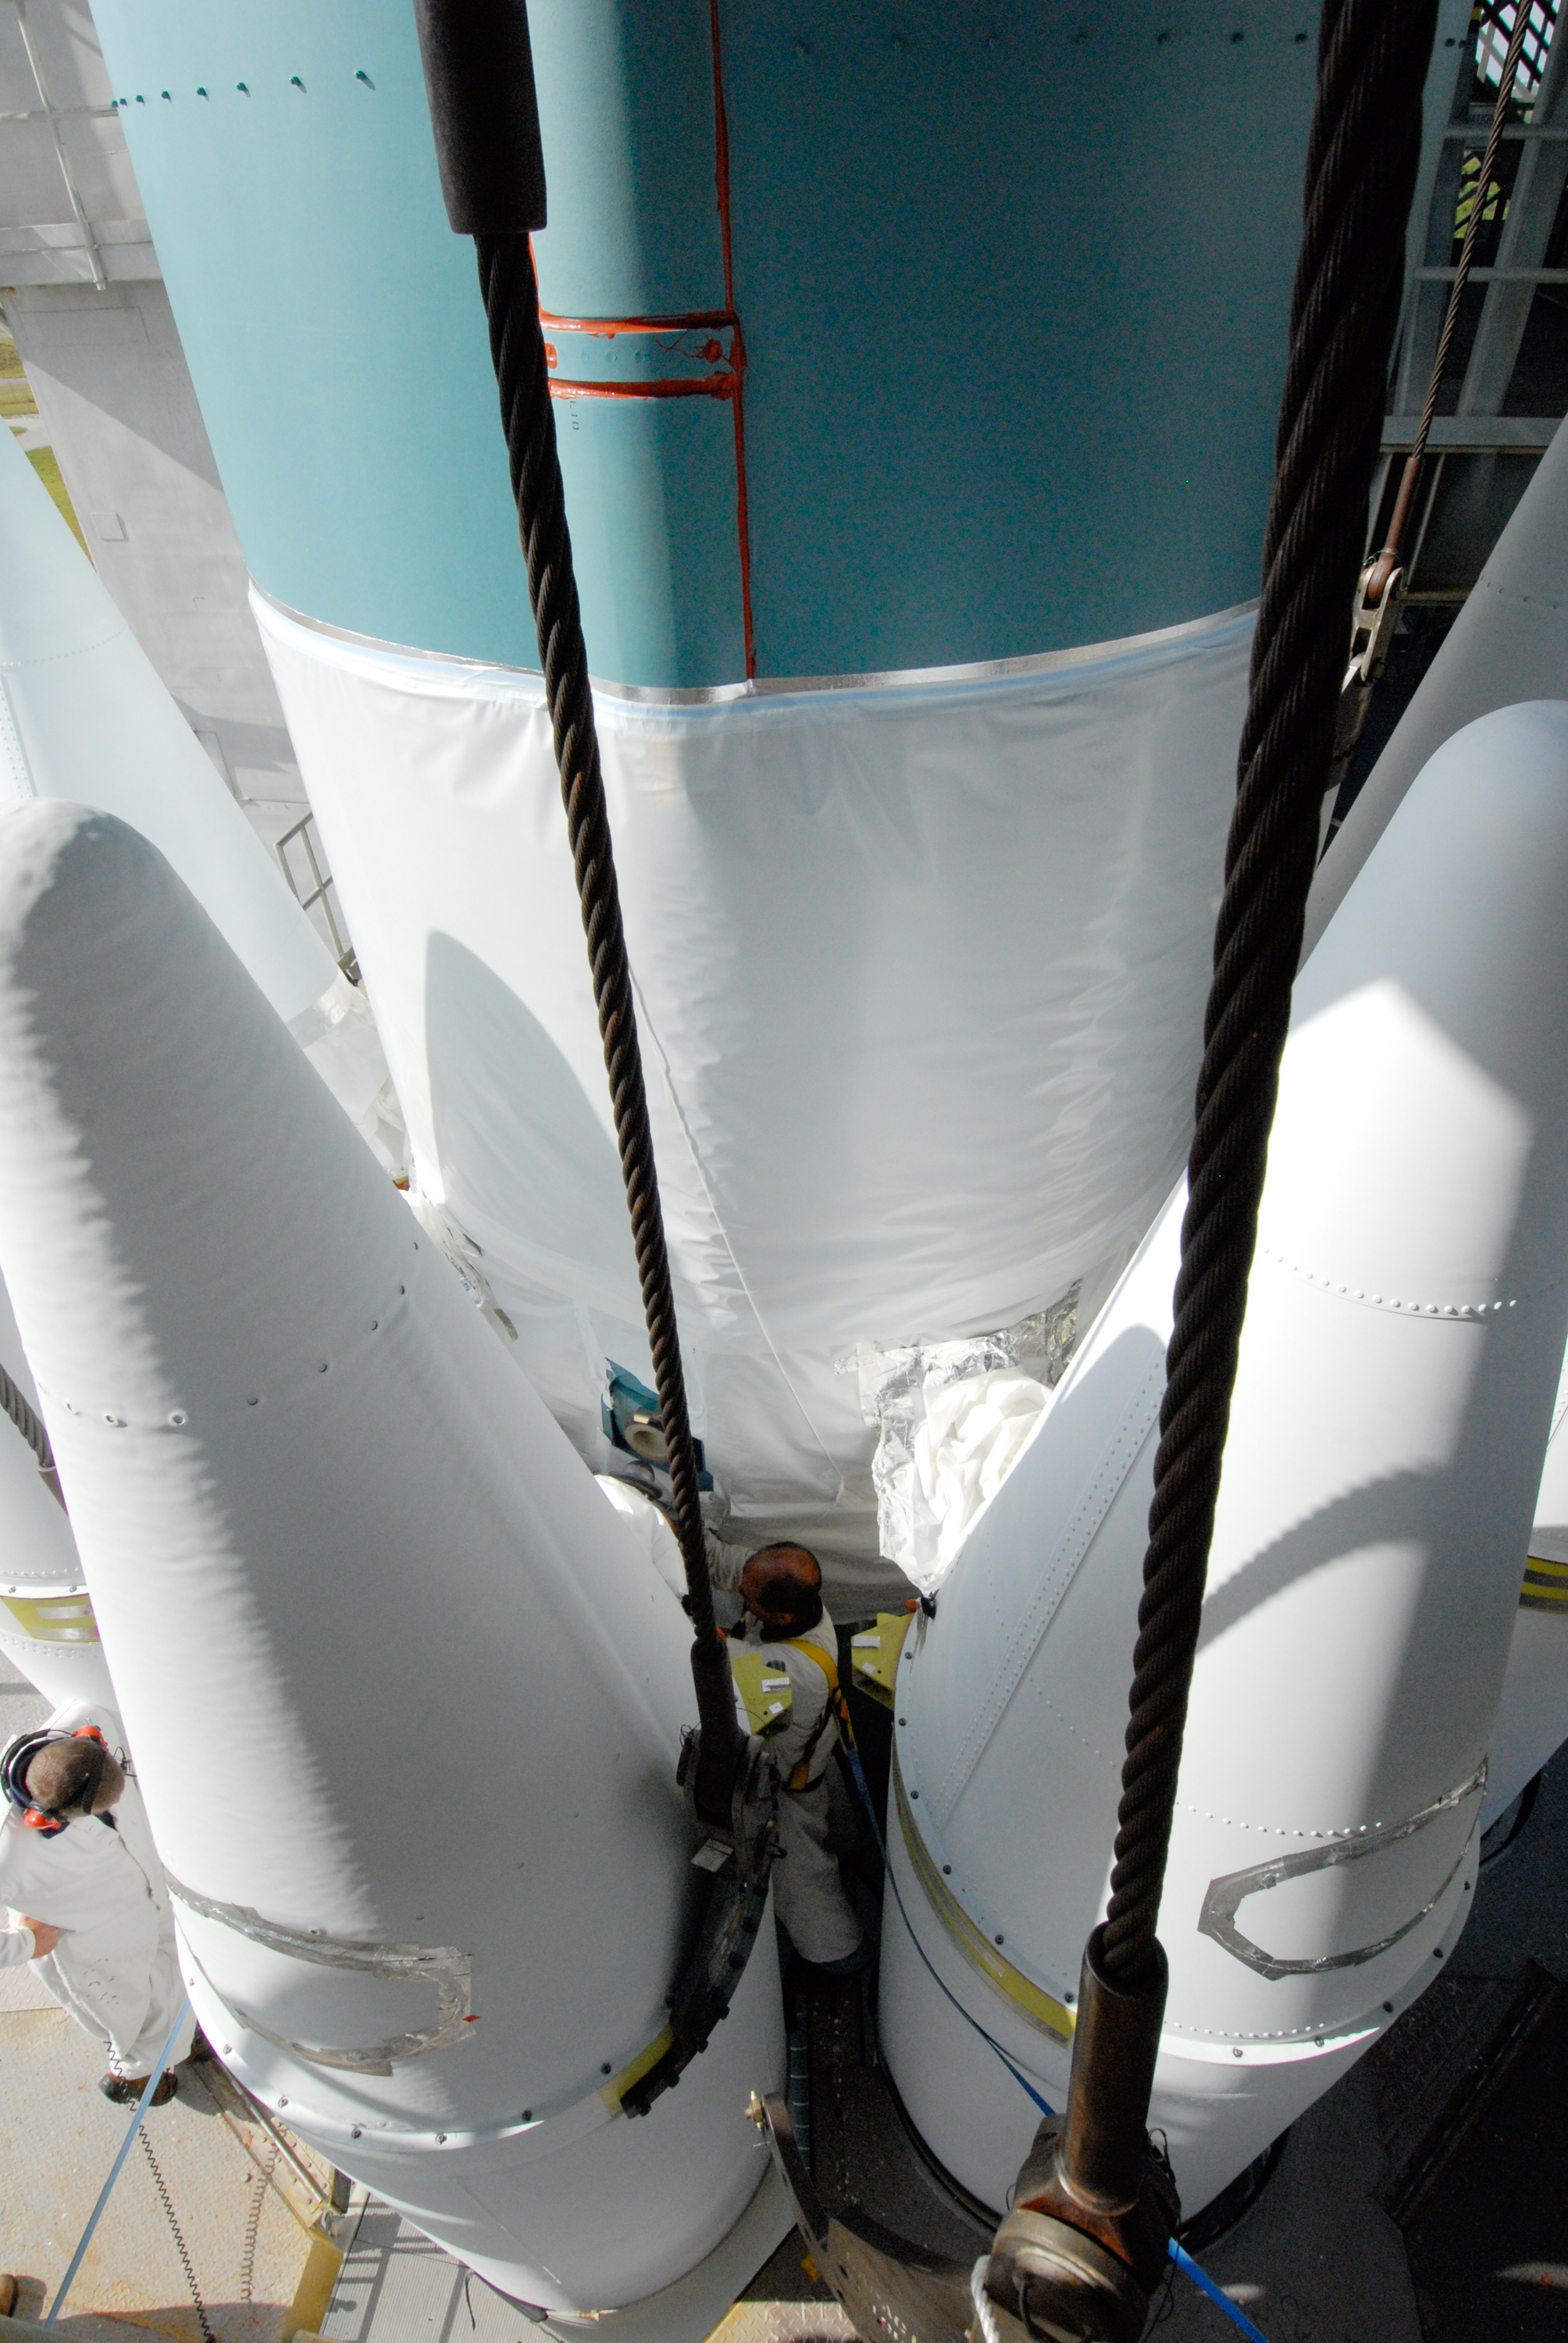 Technicans between heavy booster and Delta II first stage